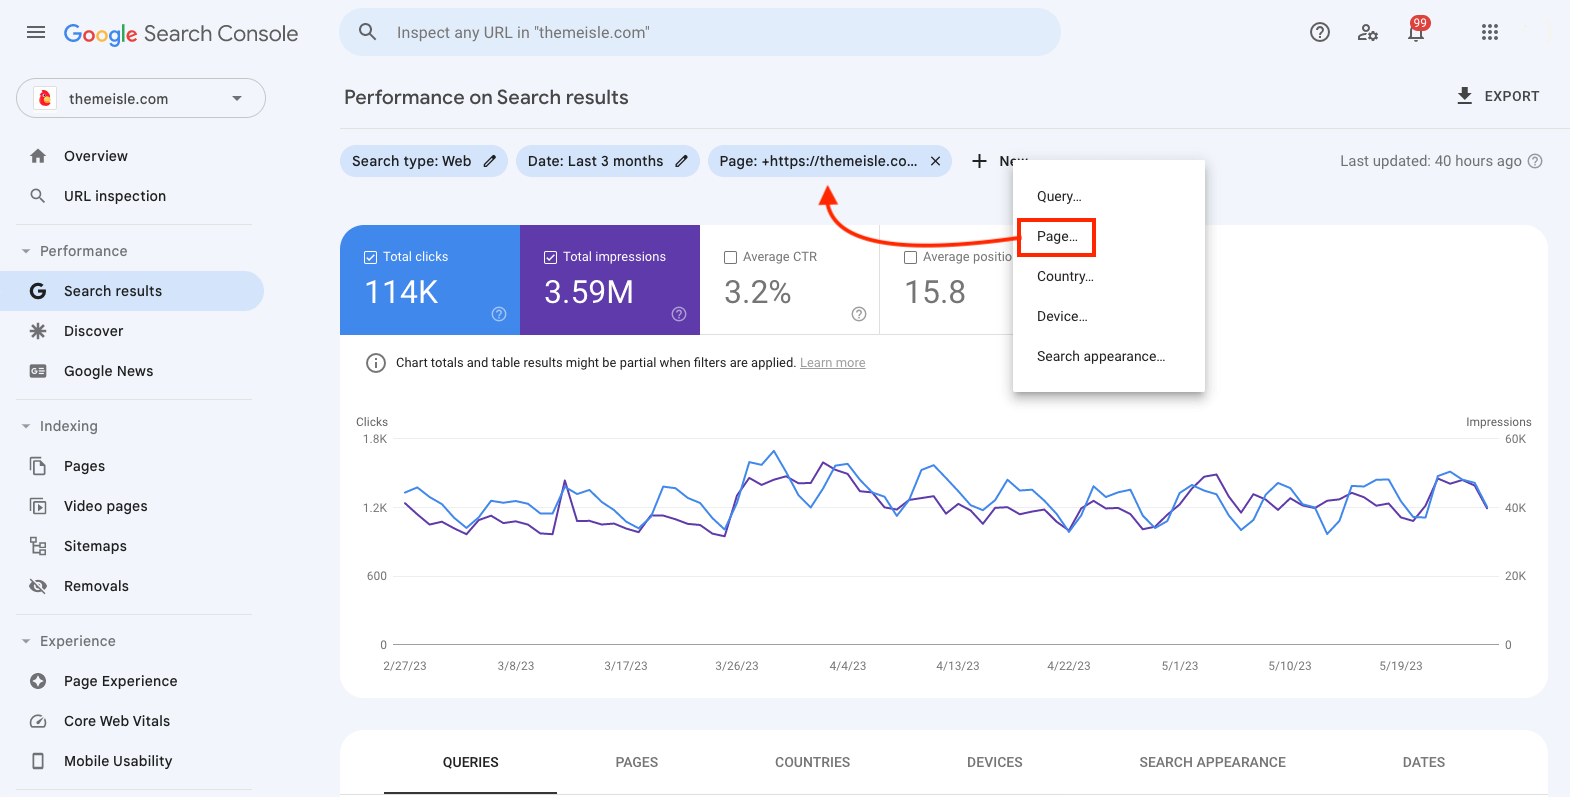 Google Search Console Search Results Analysis screenshot